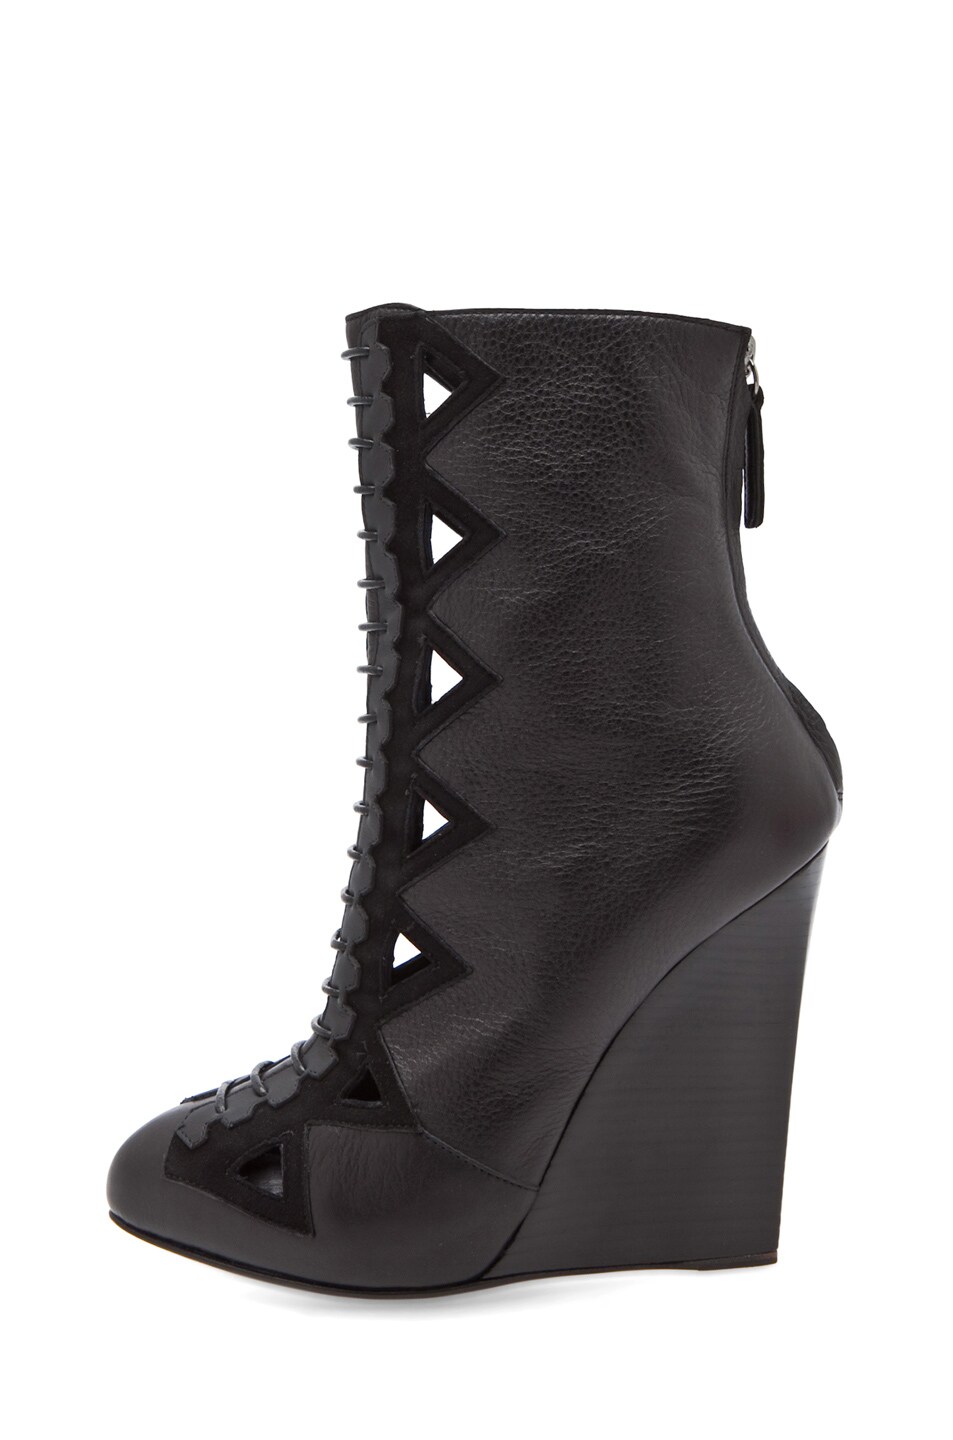 Image 1 of Proenza Schouler Runway Wedge Booty with Cut-Out Detail in Black